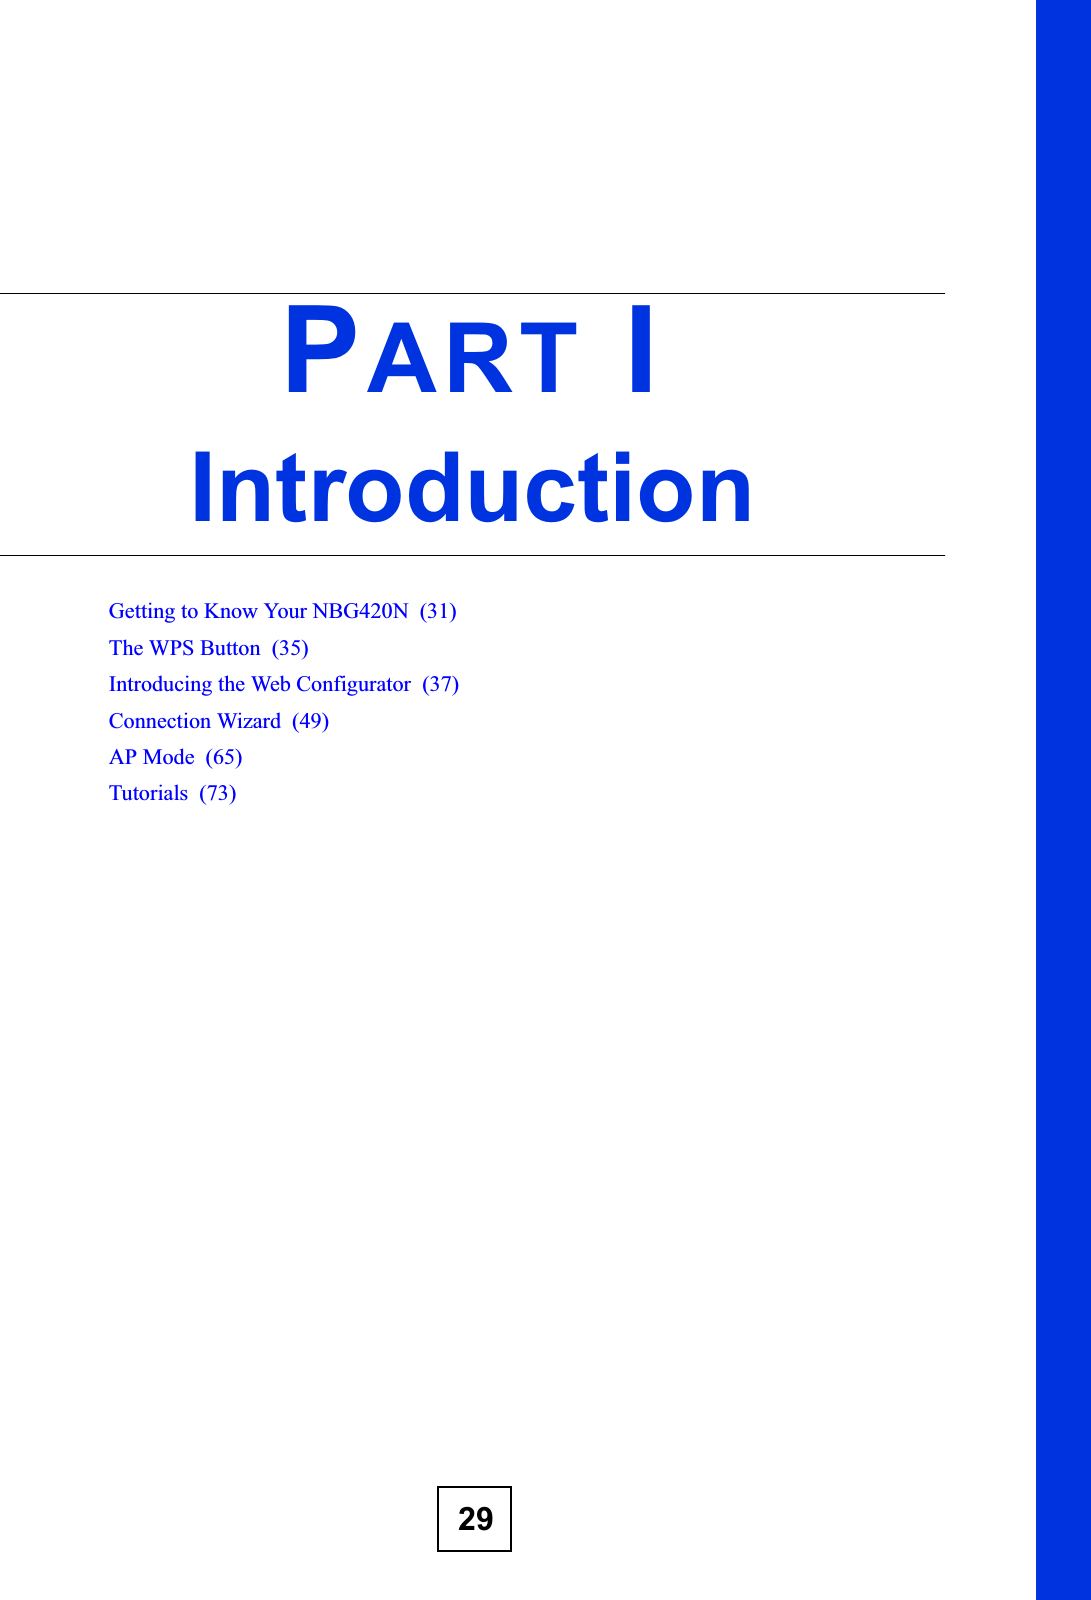 29PART IIntroductionGetting to Know Your NBG420N  (31)The WPS Button  (35)Introducing the Web Configurator  (37)Connection Wizard  (49)AP Mode  (65)Tutorials  (73)